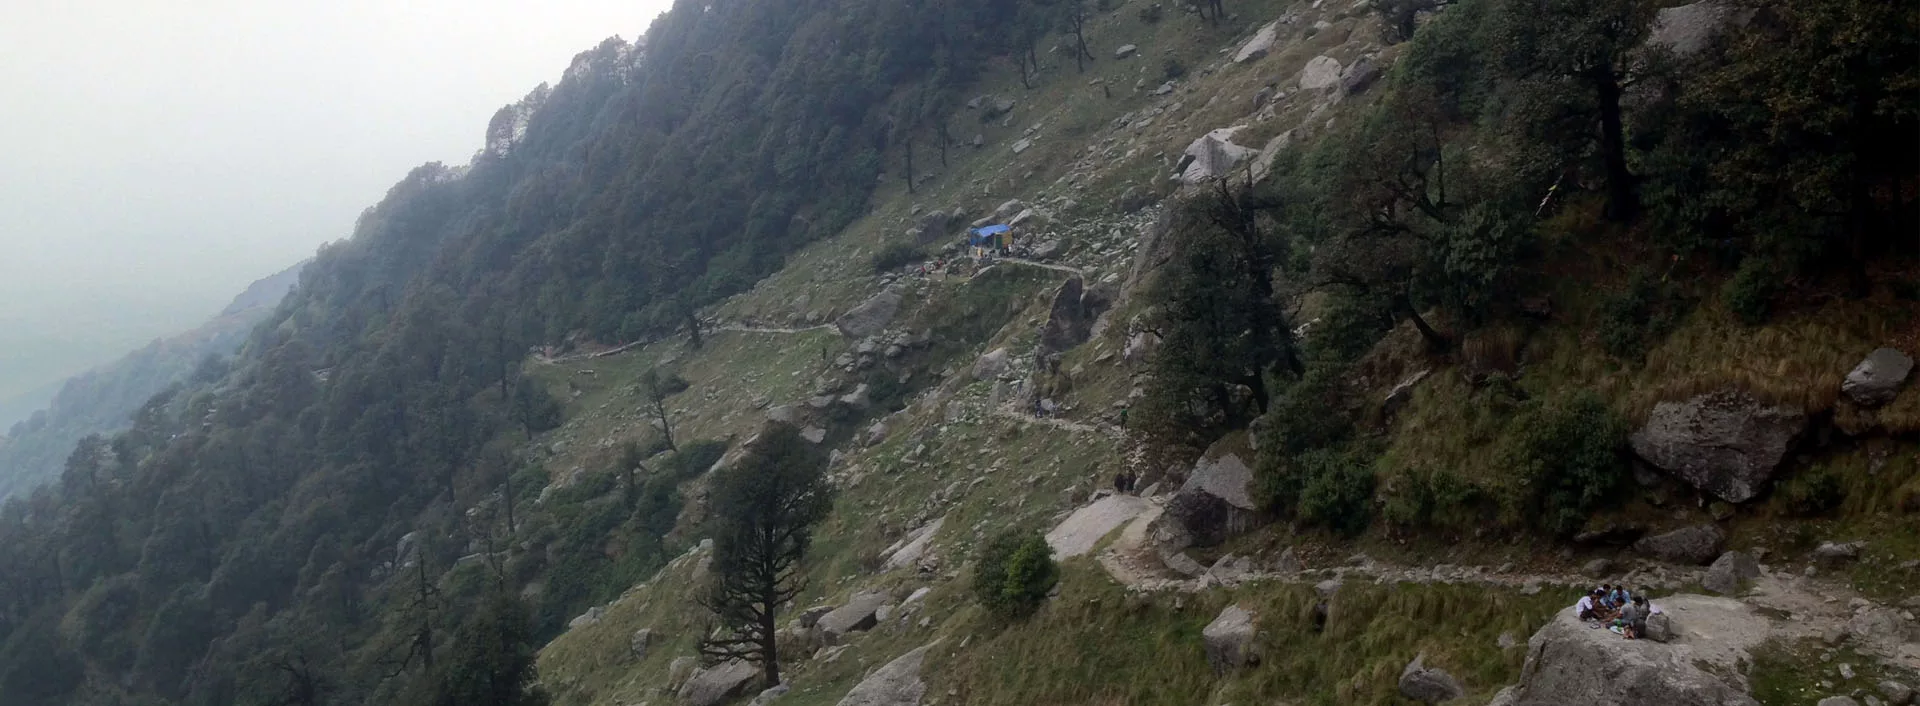 The trail beyond Triund goes to Indrahar Pass.